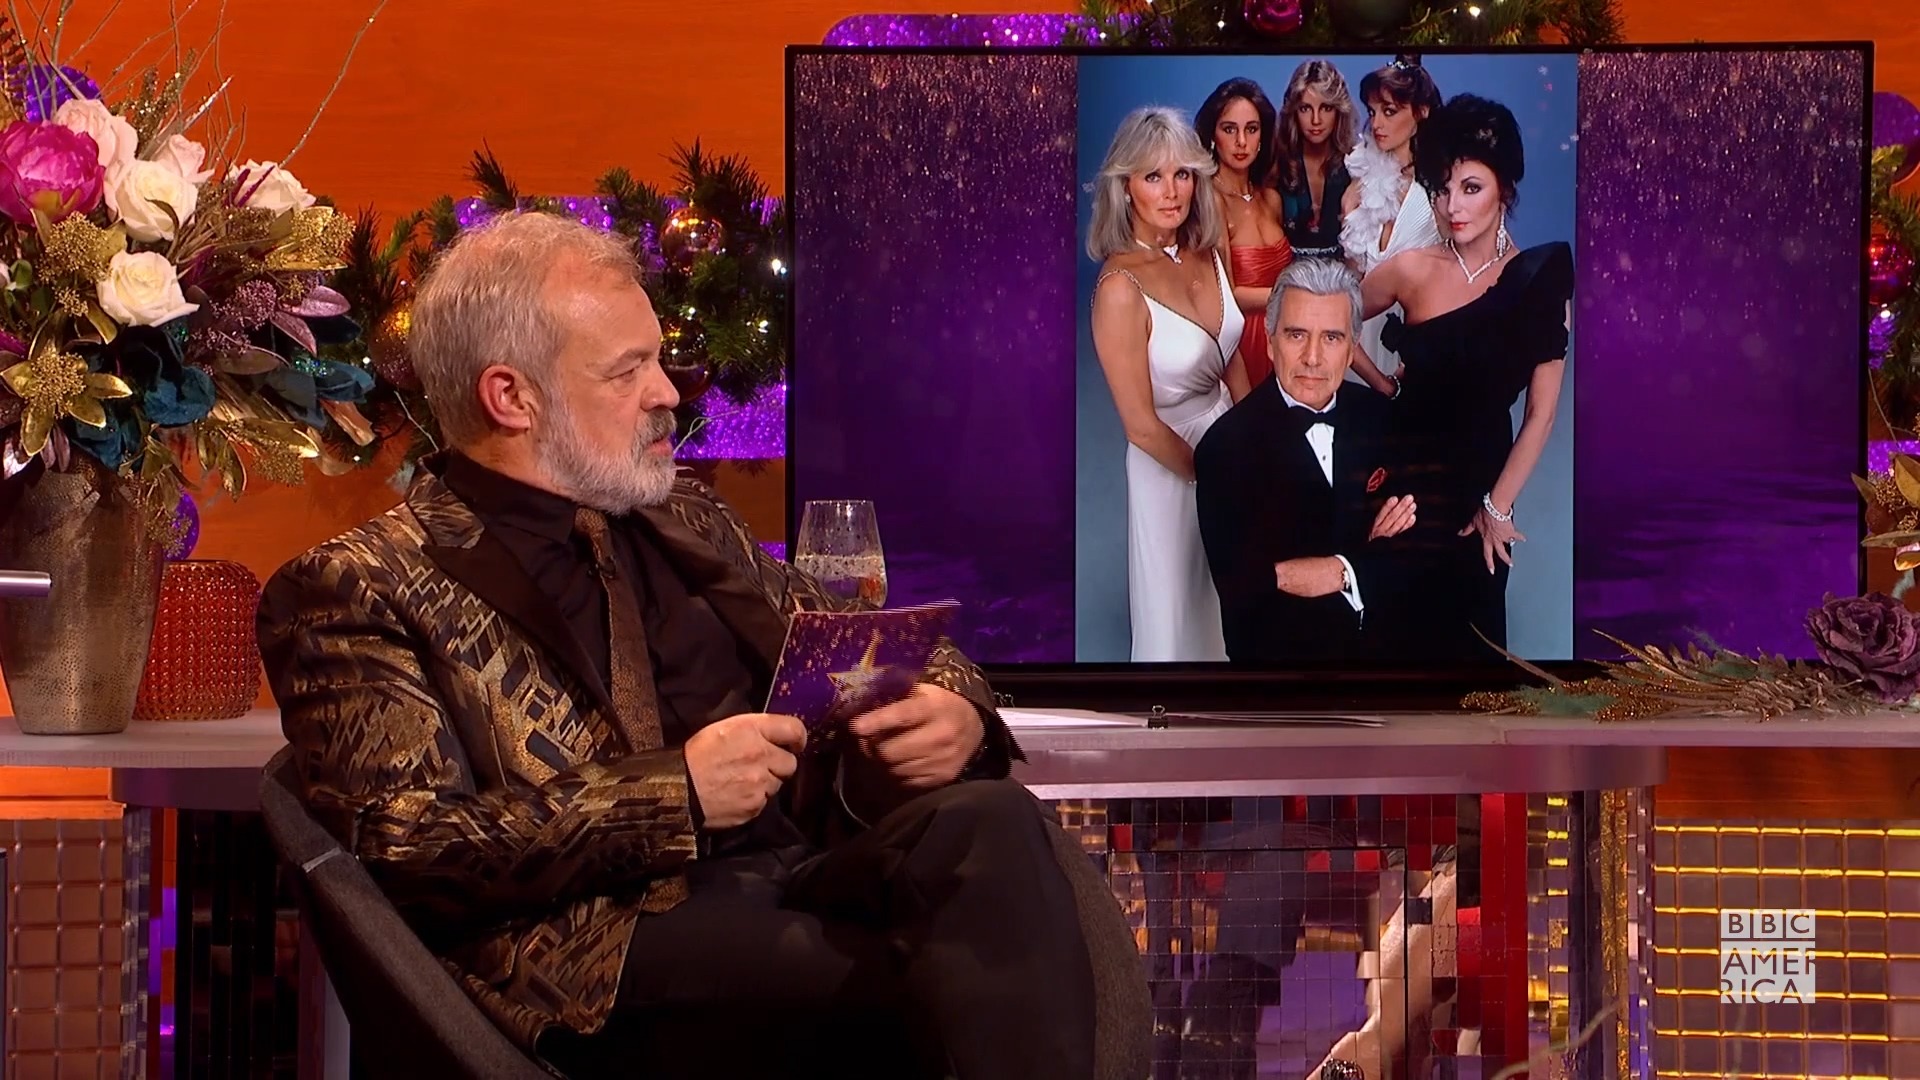 Watch Joan Collins Vs. Hollywood Ageism | The Graham Norton Show Video Extras